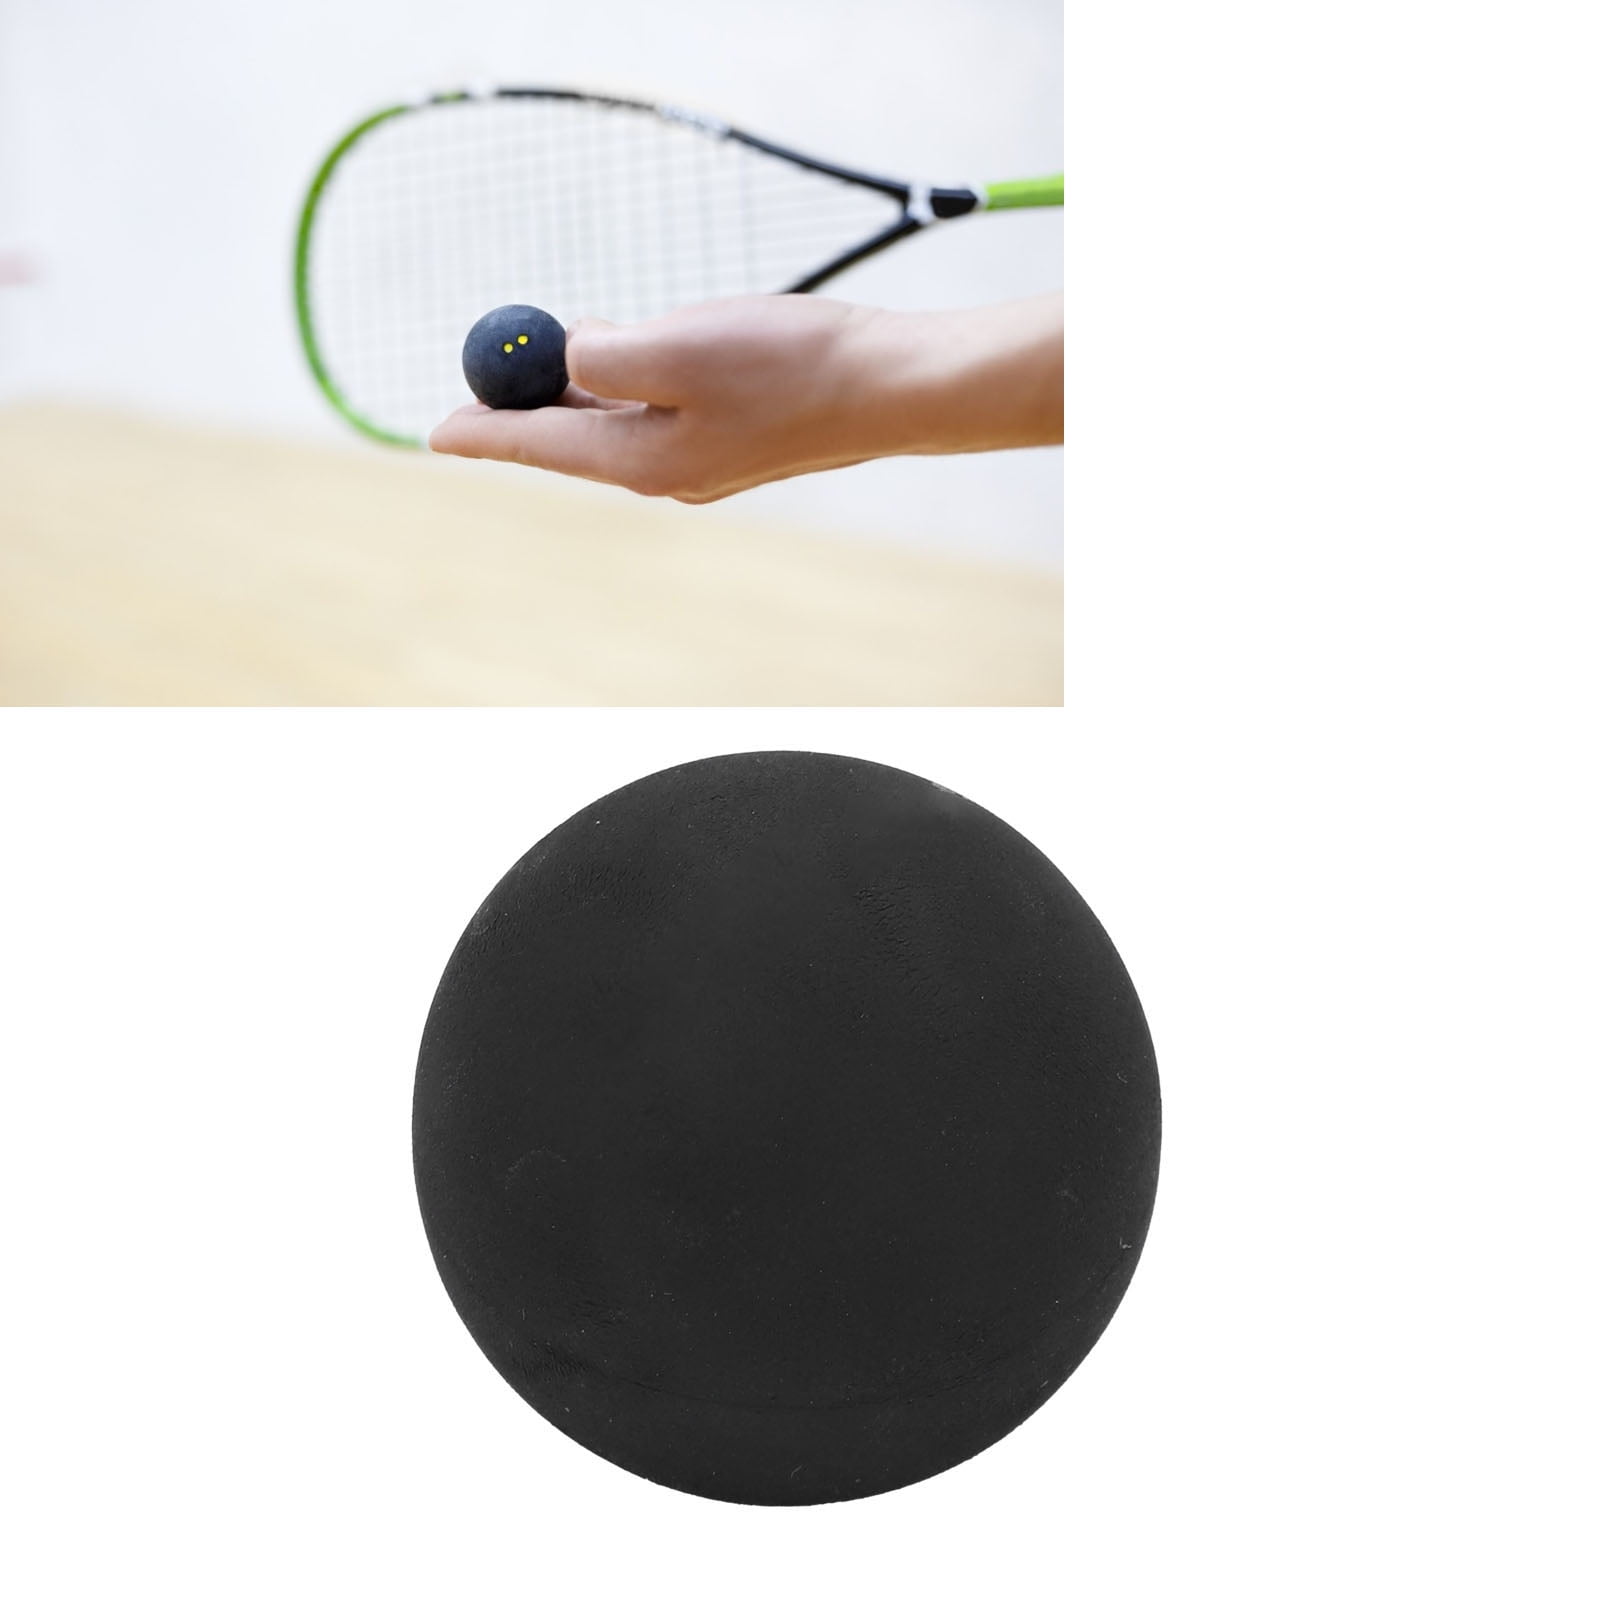 2 Pieces Rubber Single Yellow Dot Squash Balls for Intermediate Competitions 